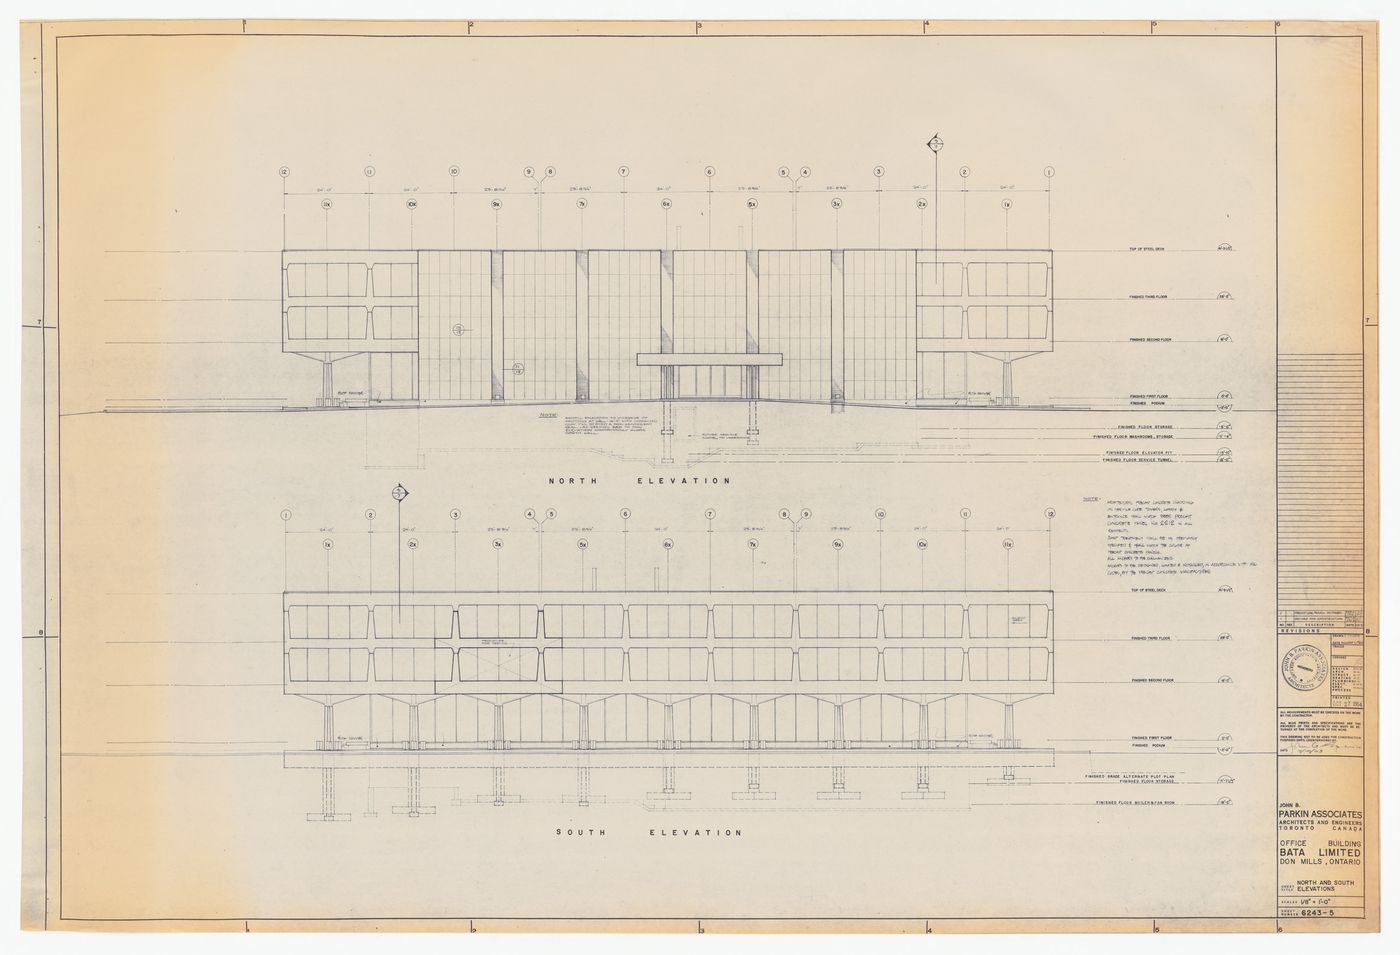 North and south elevations for Bata Limited Office Building, Don Mills, Ontario